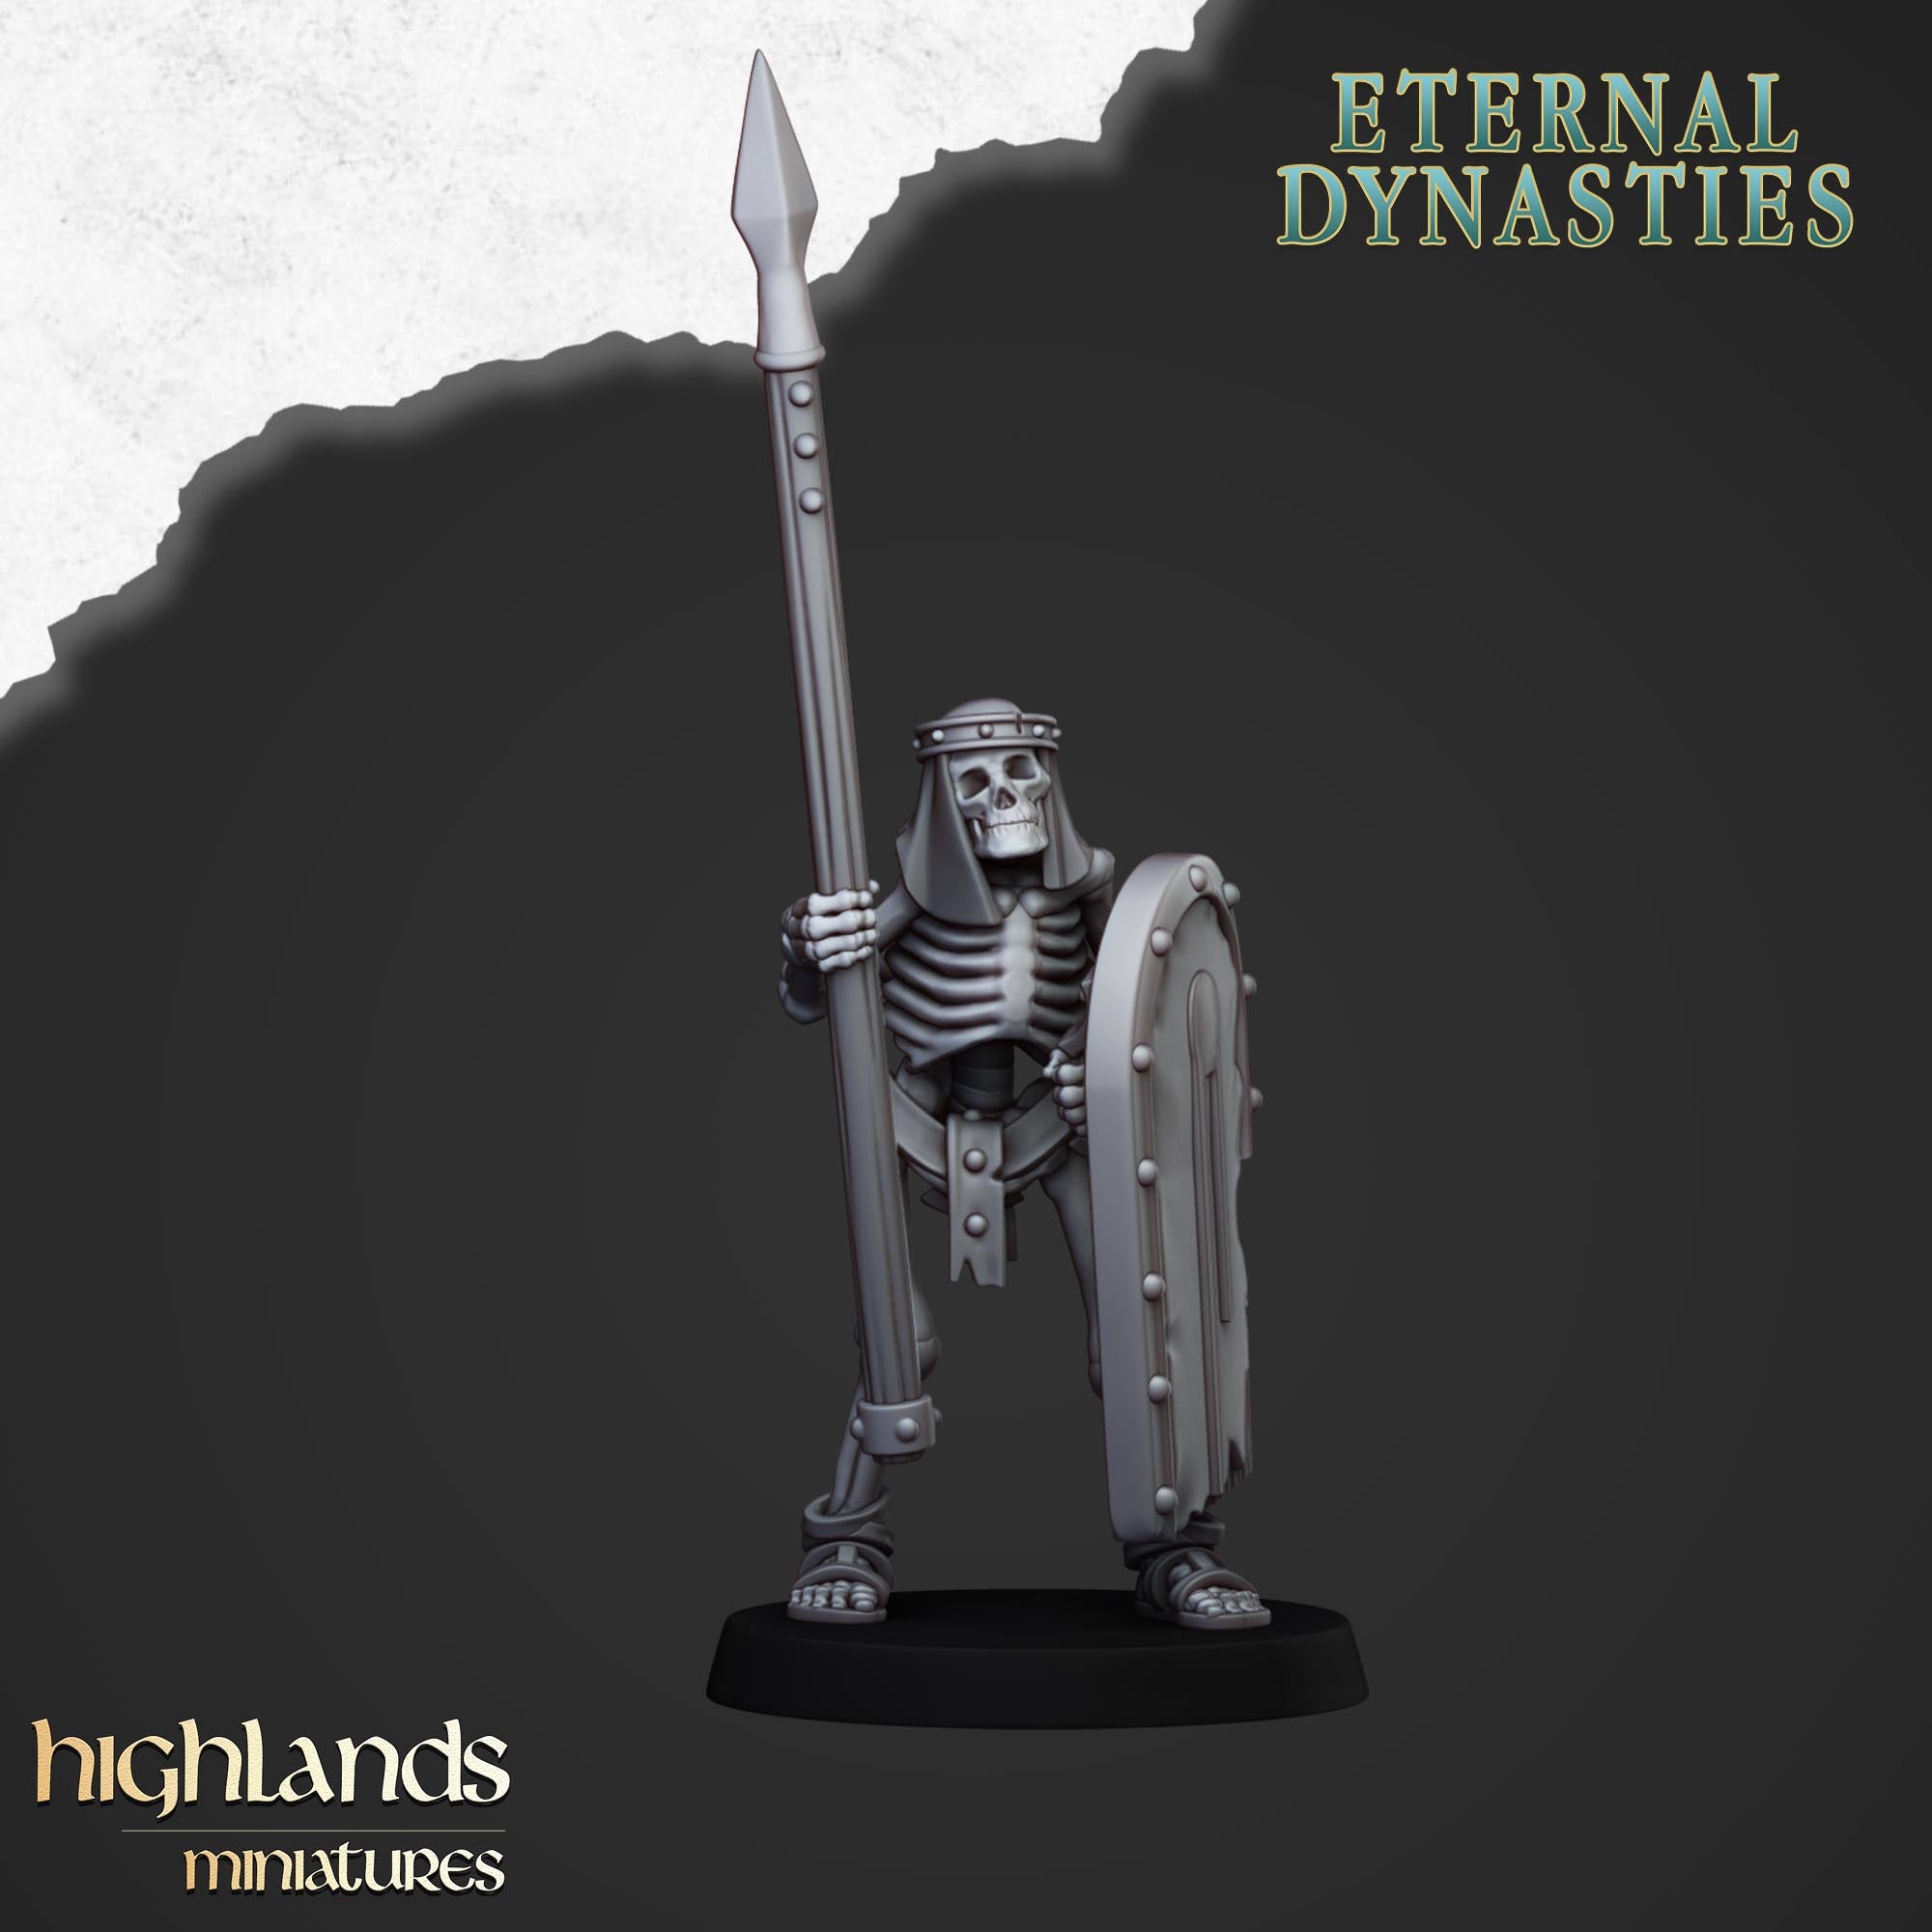 Ancient Skeletons with Spears (x15) - Eternal Dynasties - | Highlands Miniatures